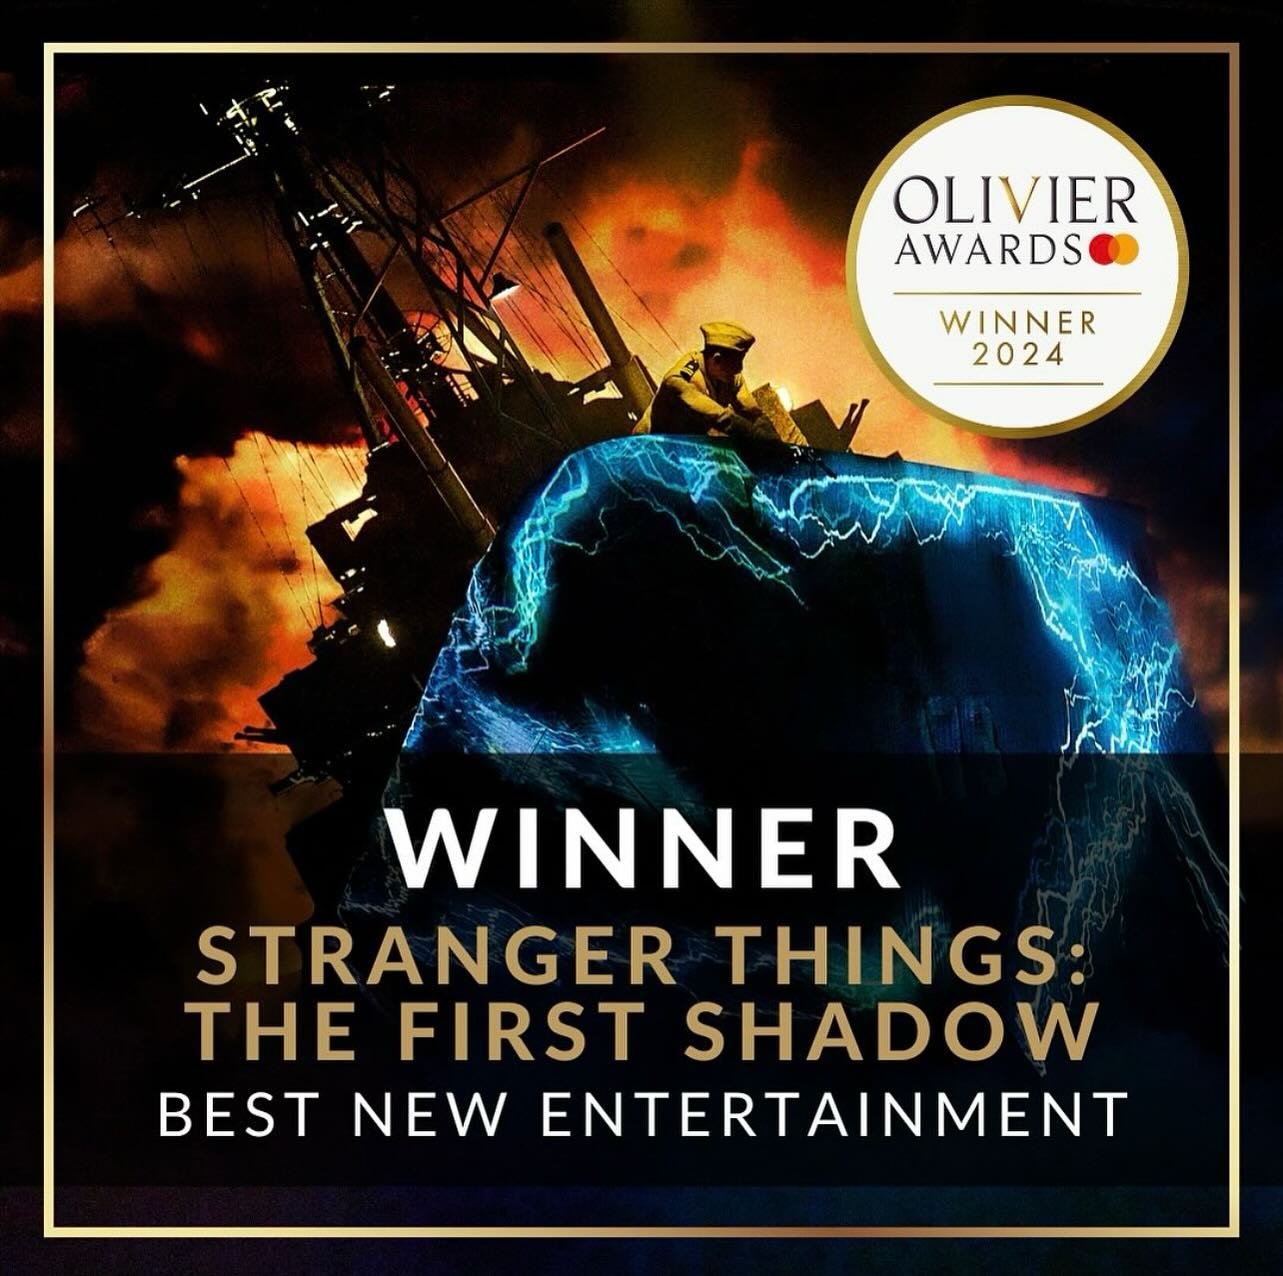 Woohoo! Stranger Things: The First Shadow has just WON the #OlivierAward for &lsquo;Best New Entertainment&rsquo; 2024 Huge congratulations to everyone that brought this monster to the stage! 👏🏻

CREATURE EFFECTS 👹 by us here @stitchesandglue 

#m